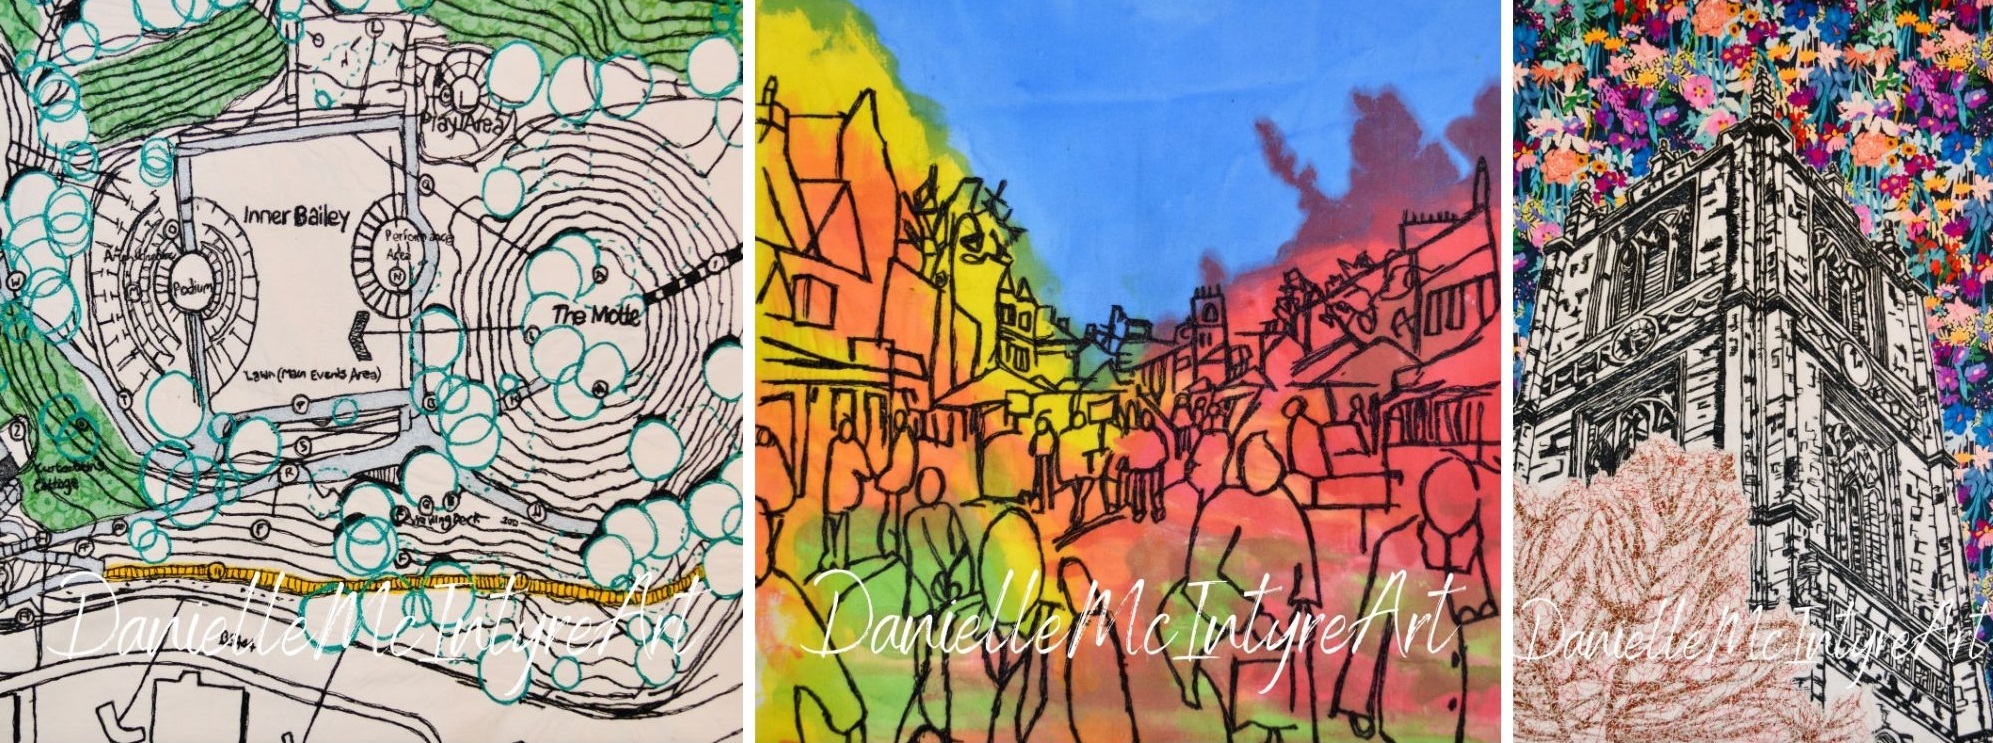  Artwork with Danielle McIntyre: Year 1/2 Bailey Hill, Mold Market Year 6 and St Mary’s Church Year 5.